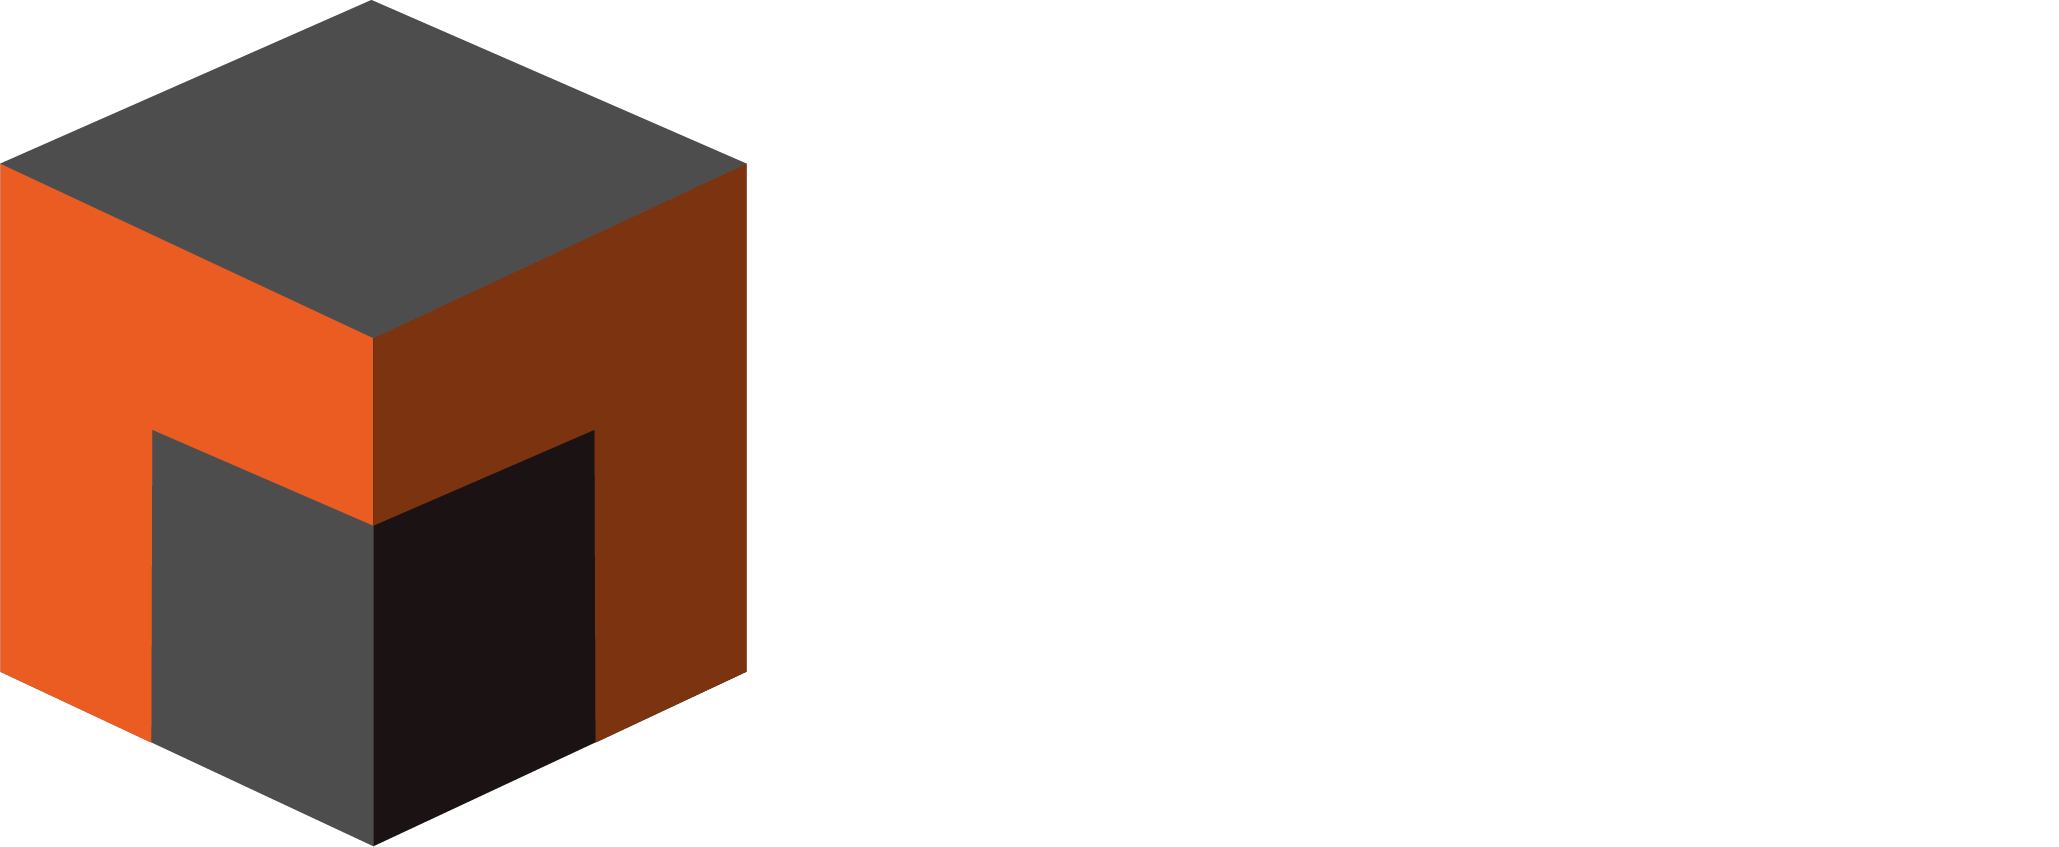 MPACK SOLUTIONS